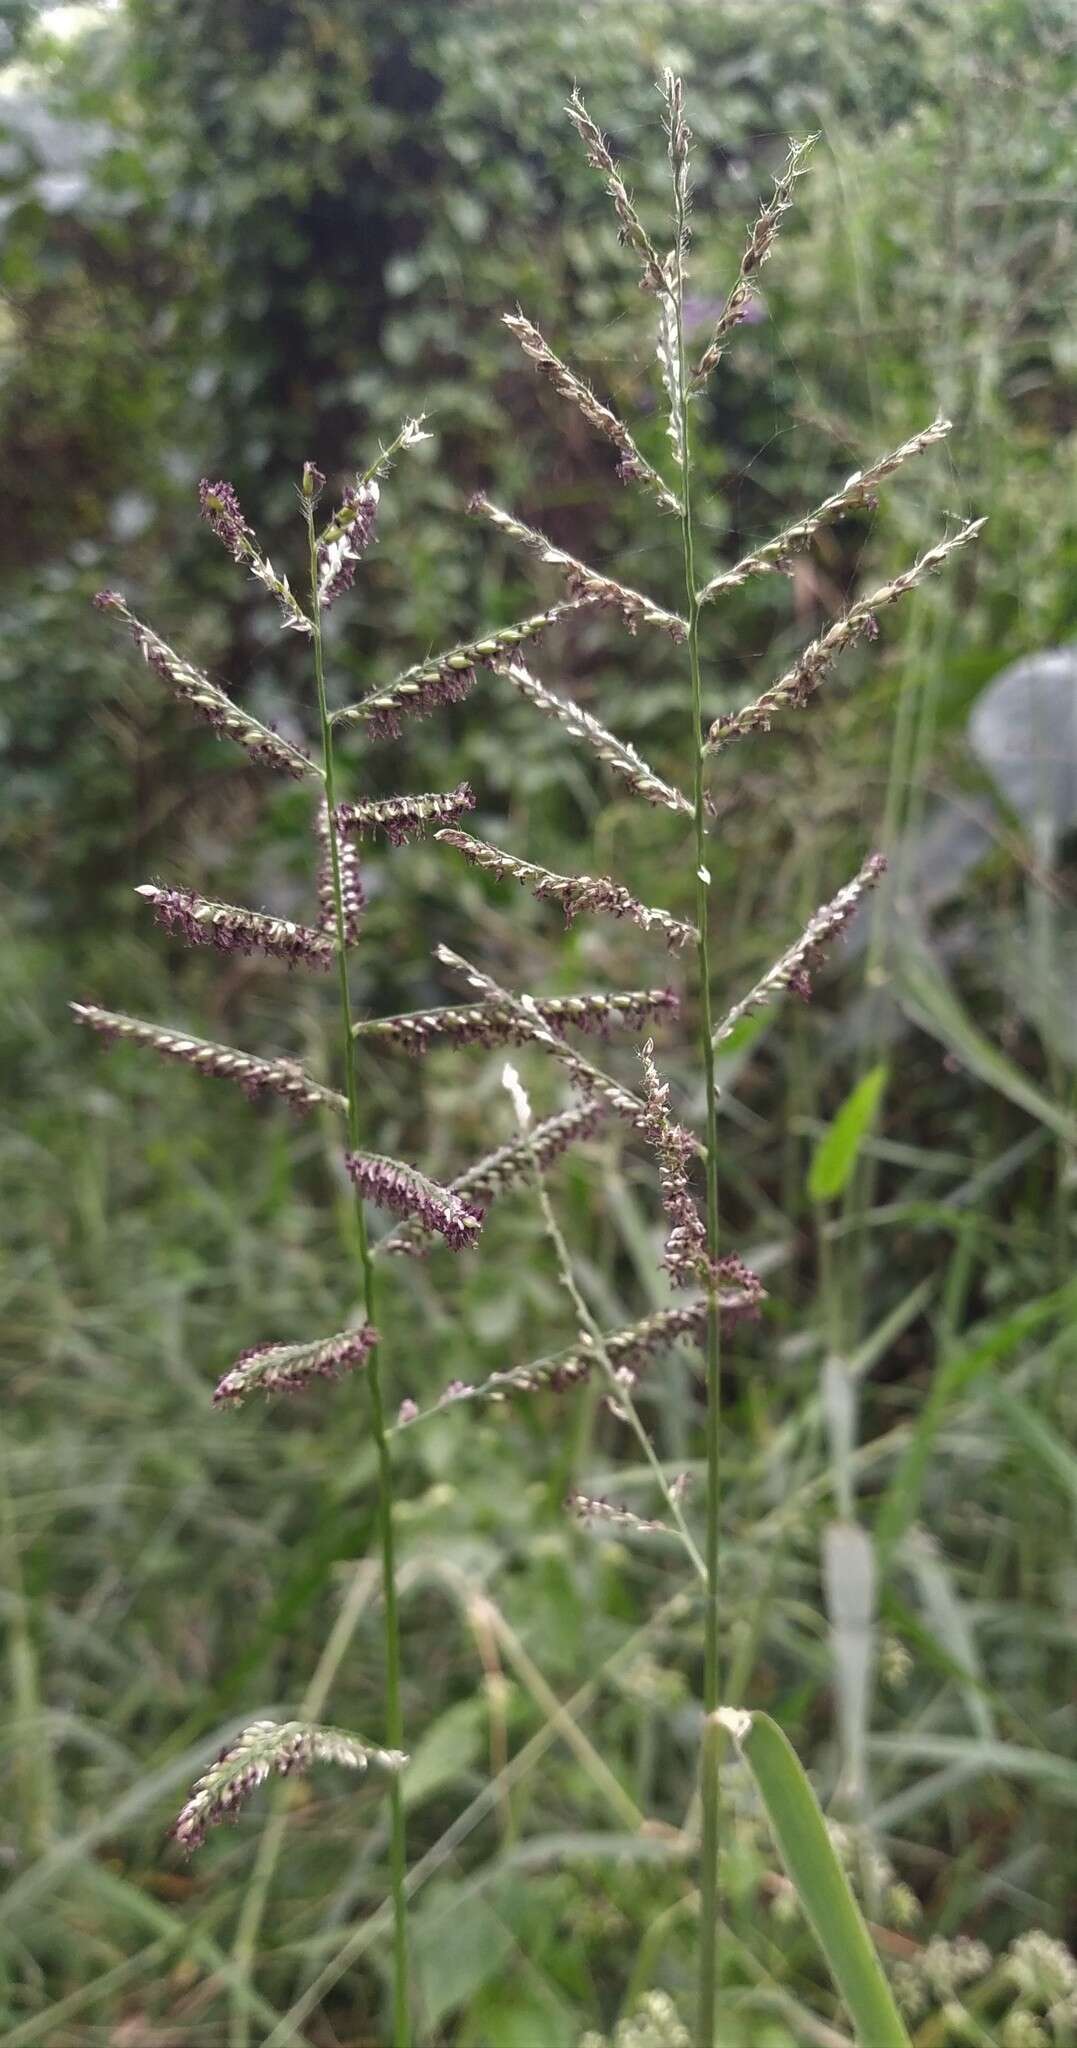 Image of Para Liverseed Grass